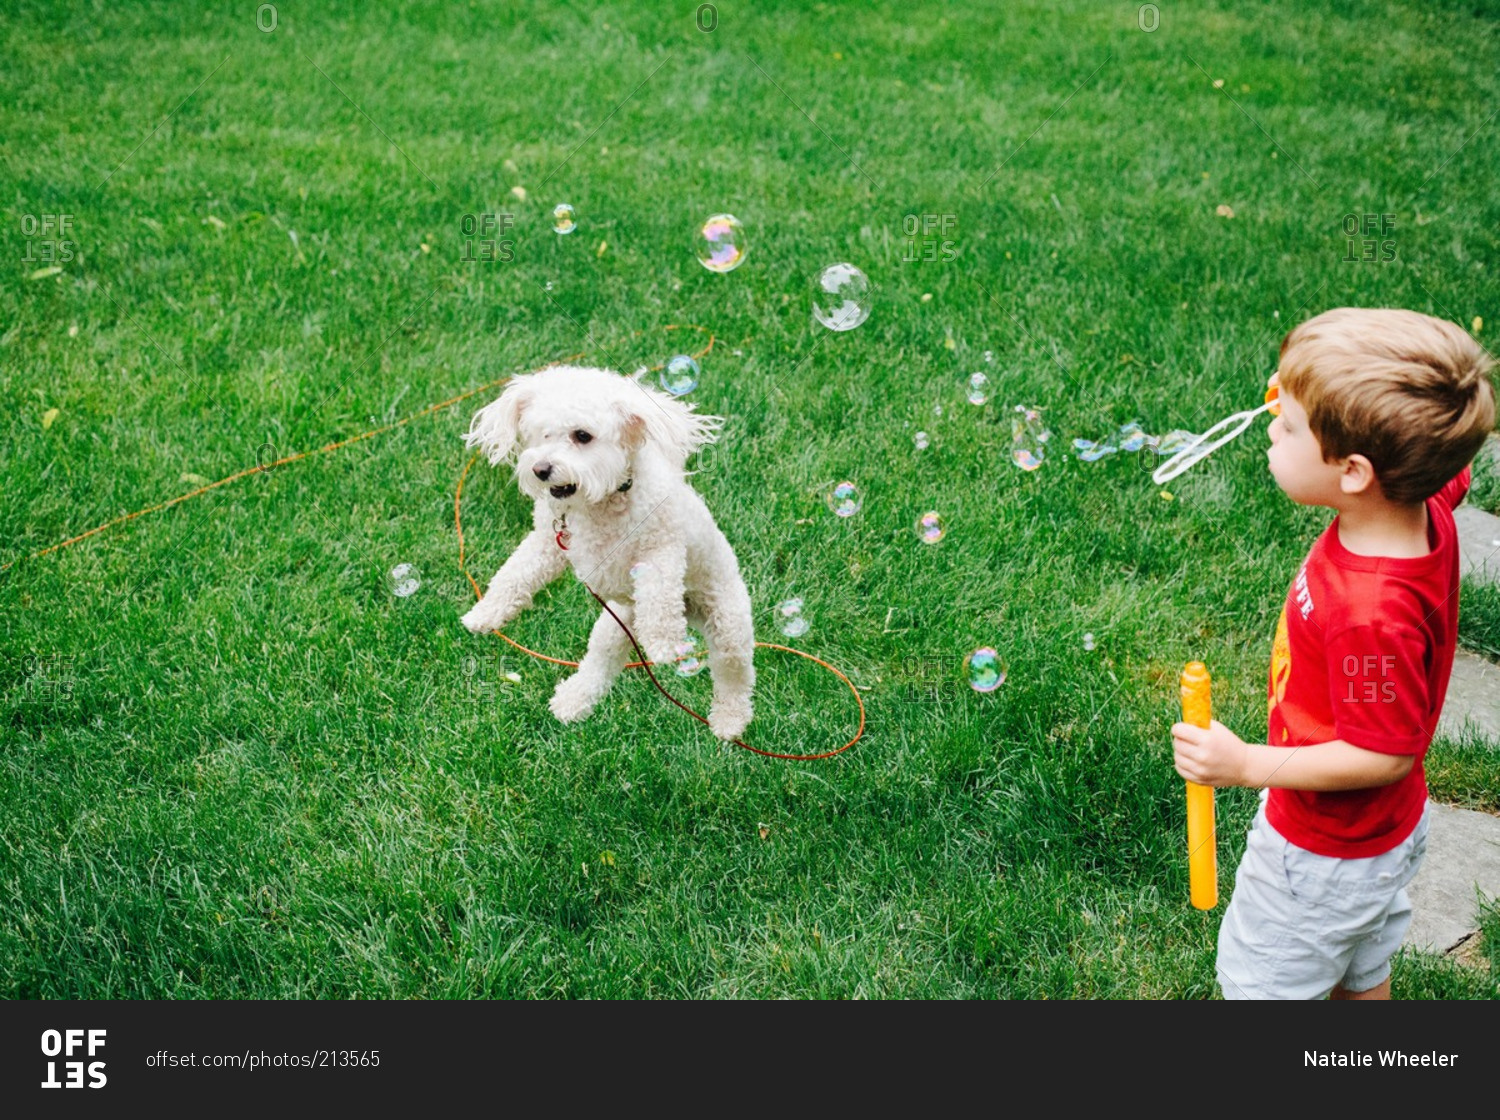 Young boy blowing soap bubbles next to a jumping dog